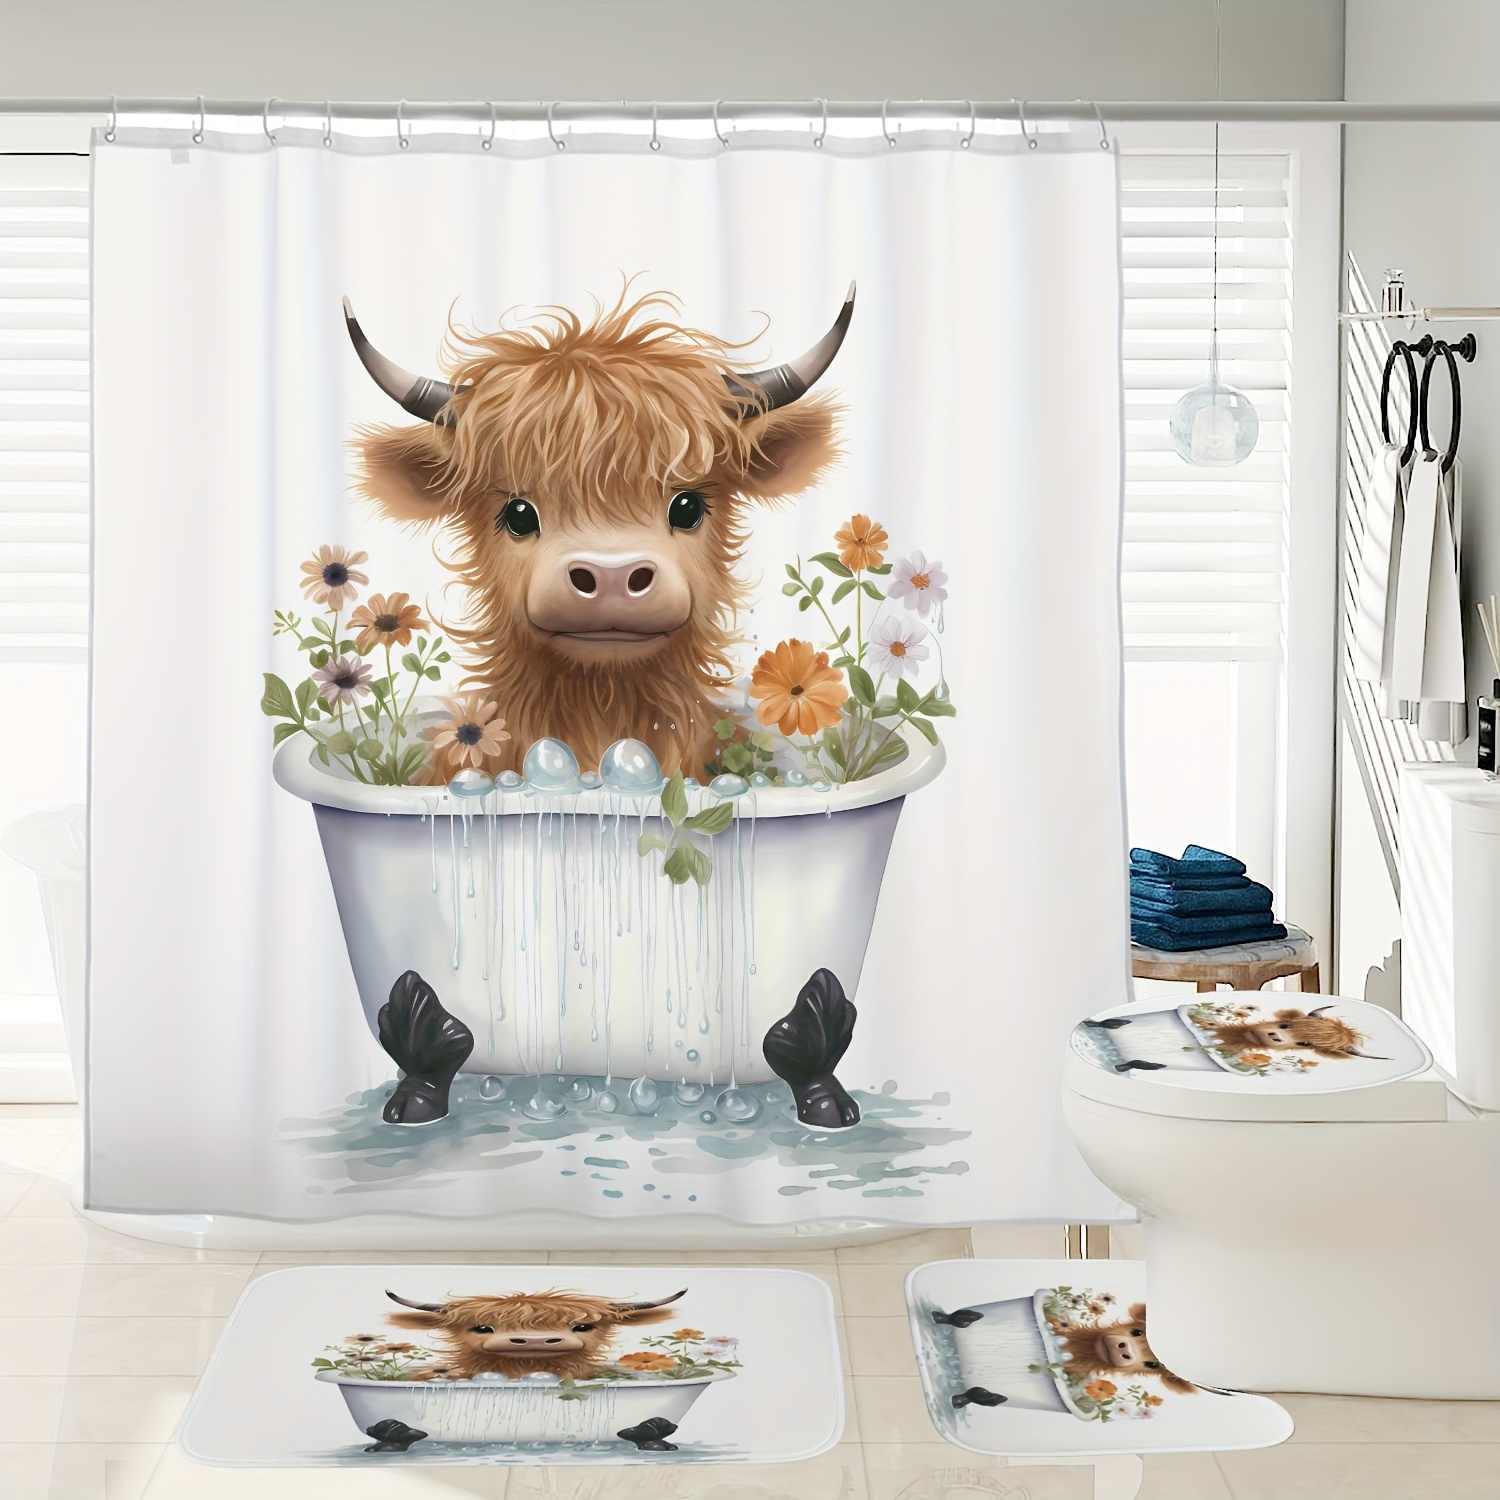 

1/4pcs Highland Cow Bathing Printed Bathroom Set, Waterproof Shower Curtain With Non-slip Rugs, Toilet Lid Cover And Bath Mat, Modern Home Decor, Rustic Farm Animal Design